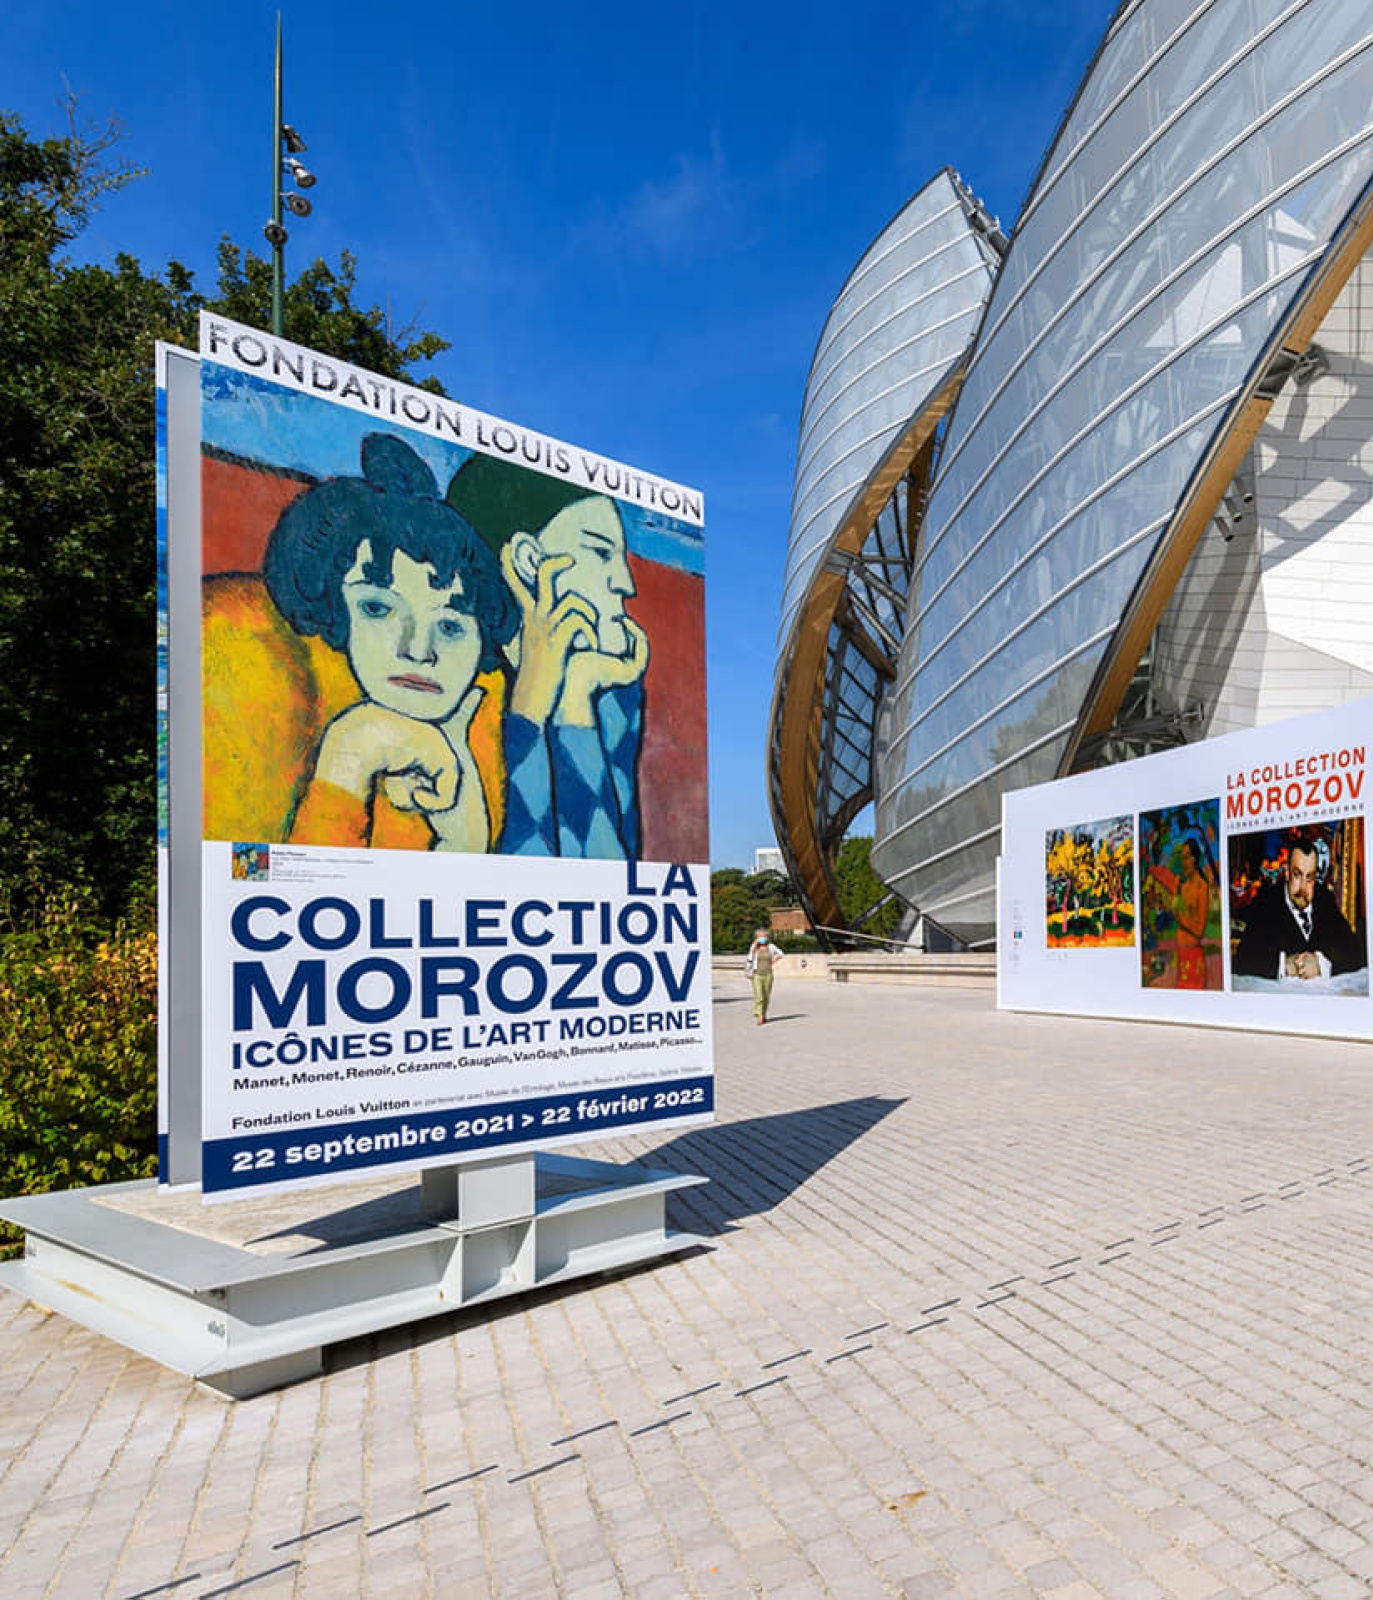 Masterpieces of New Art. Collection of the Morozov Brothers